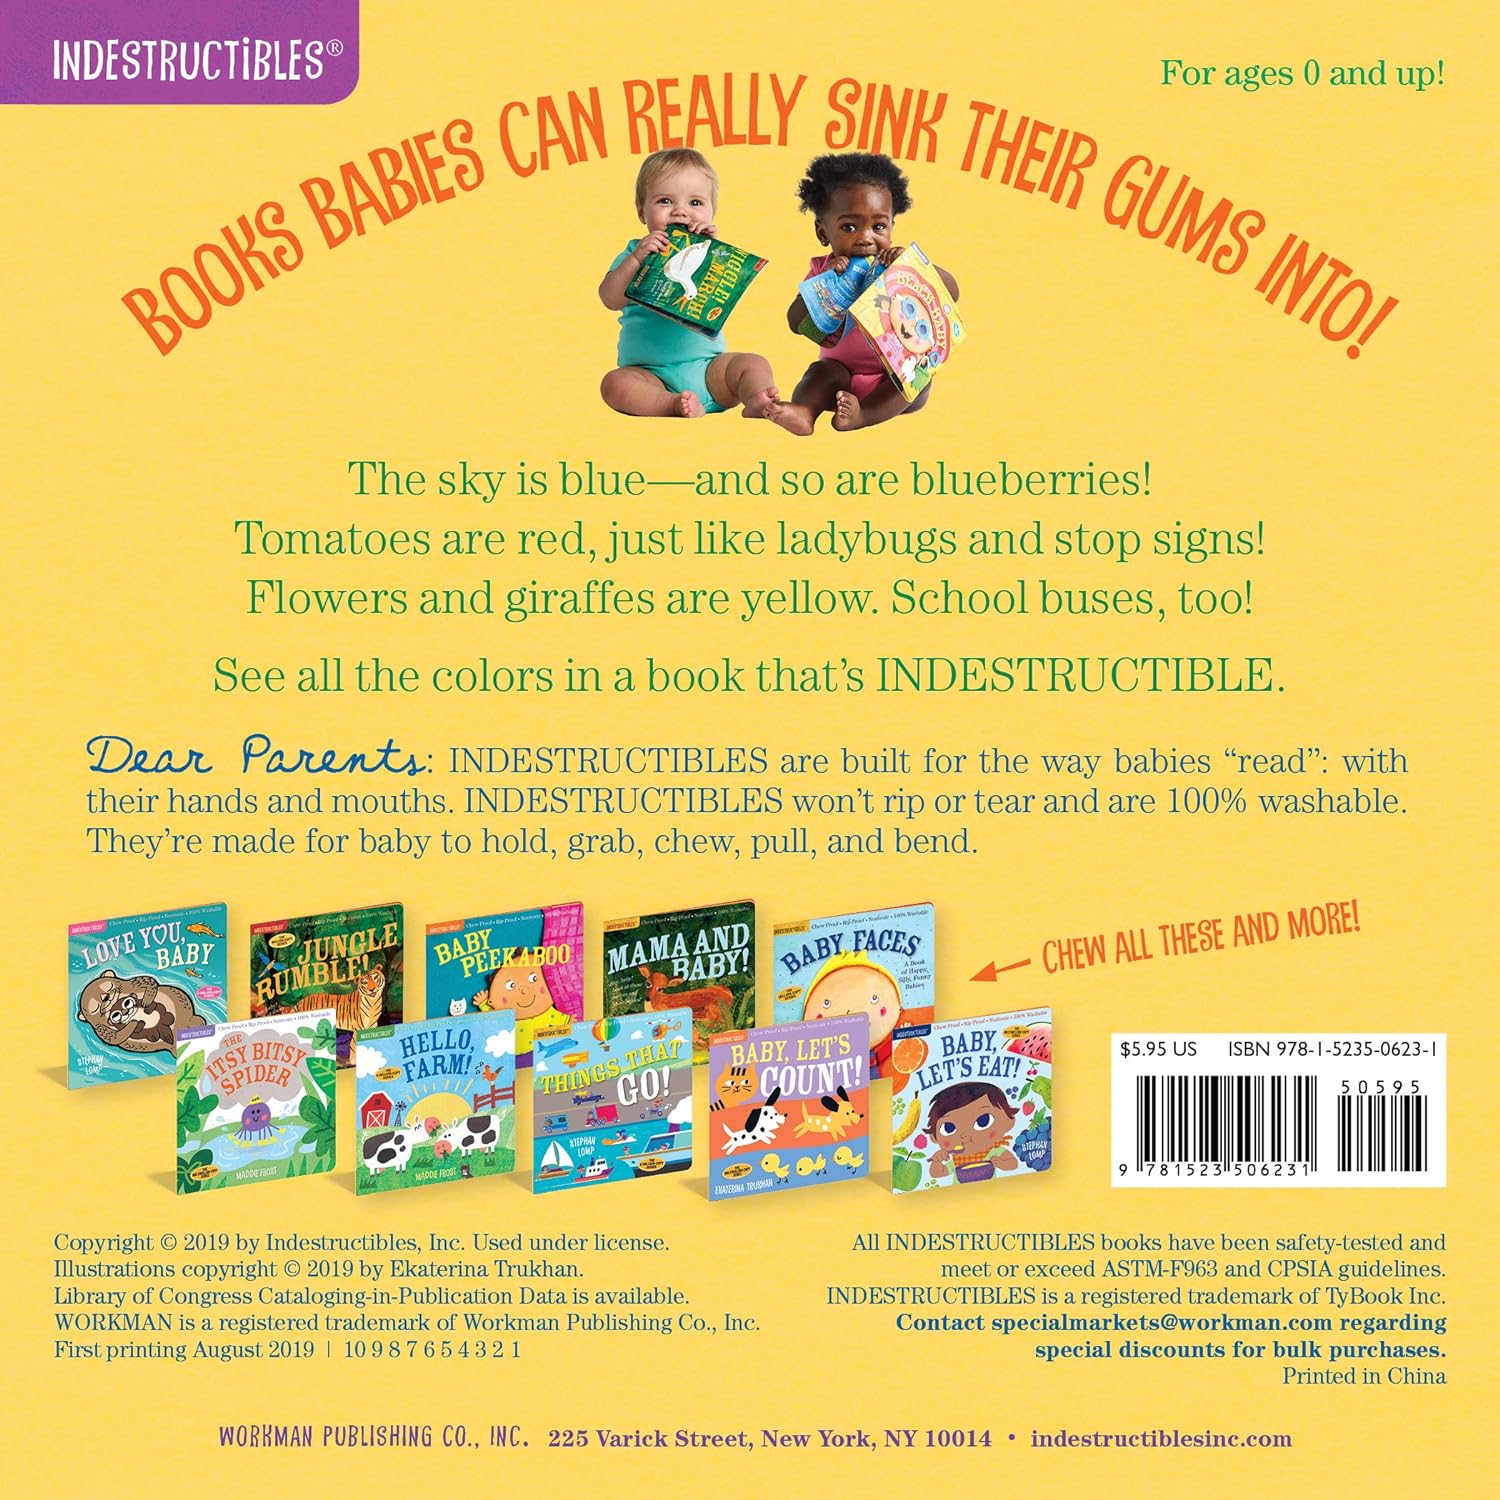 Indestructibles: Baby, See the Colors!-HACHETTE BOOK GROUP USA-Little Giant Kidz